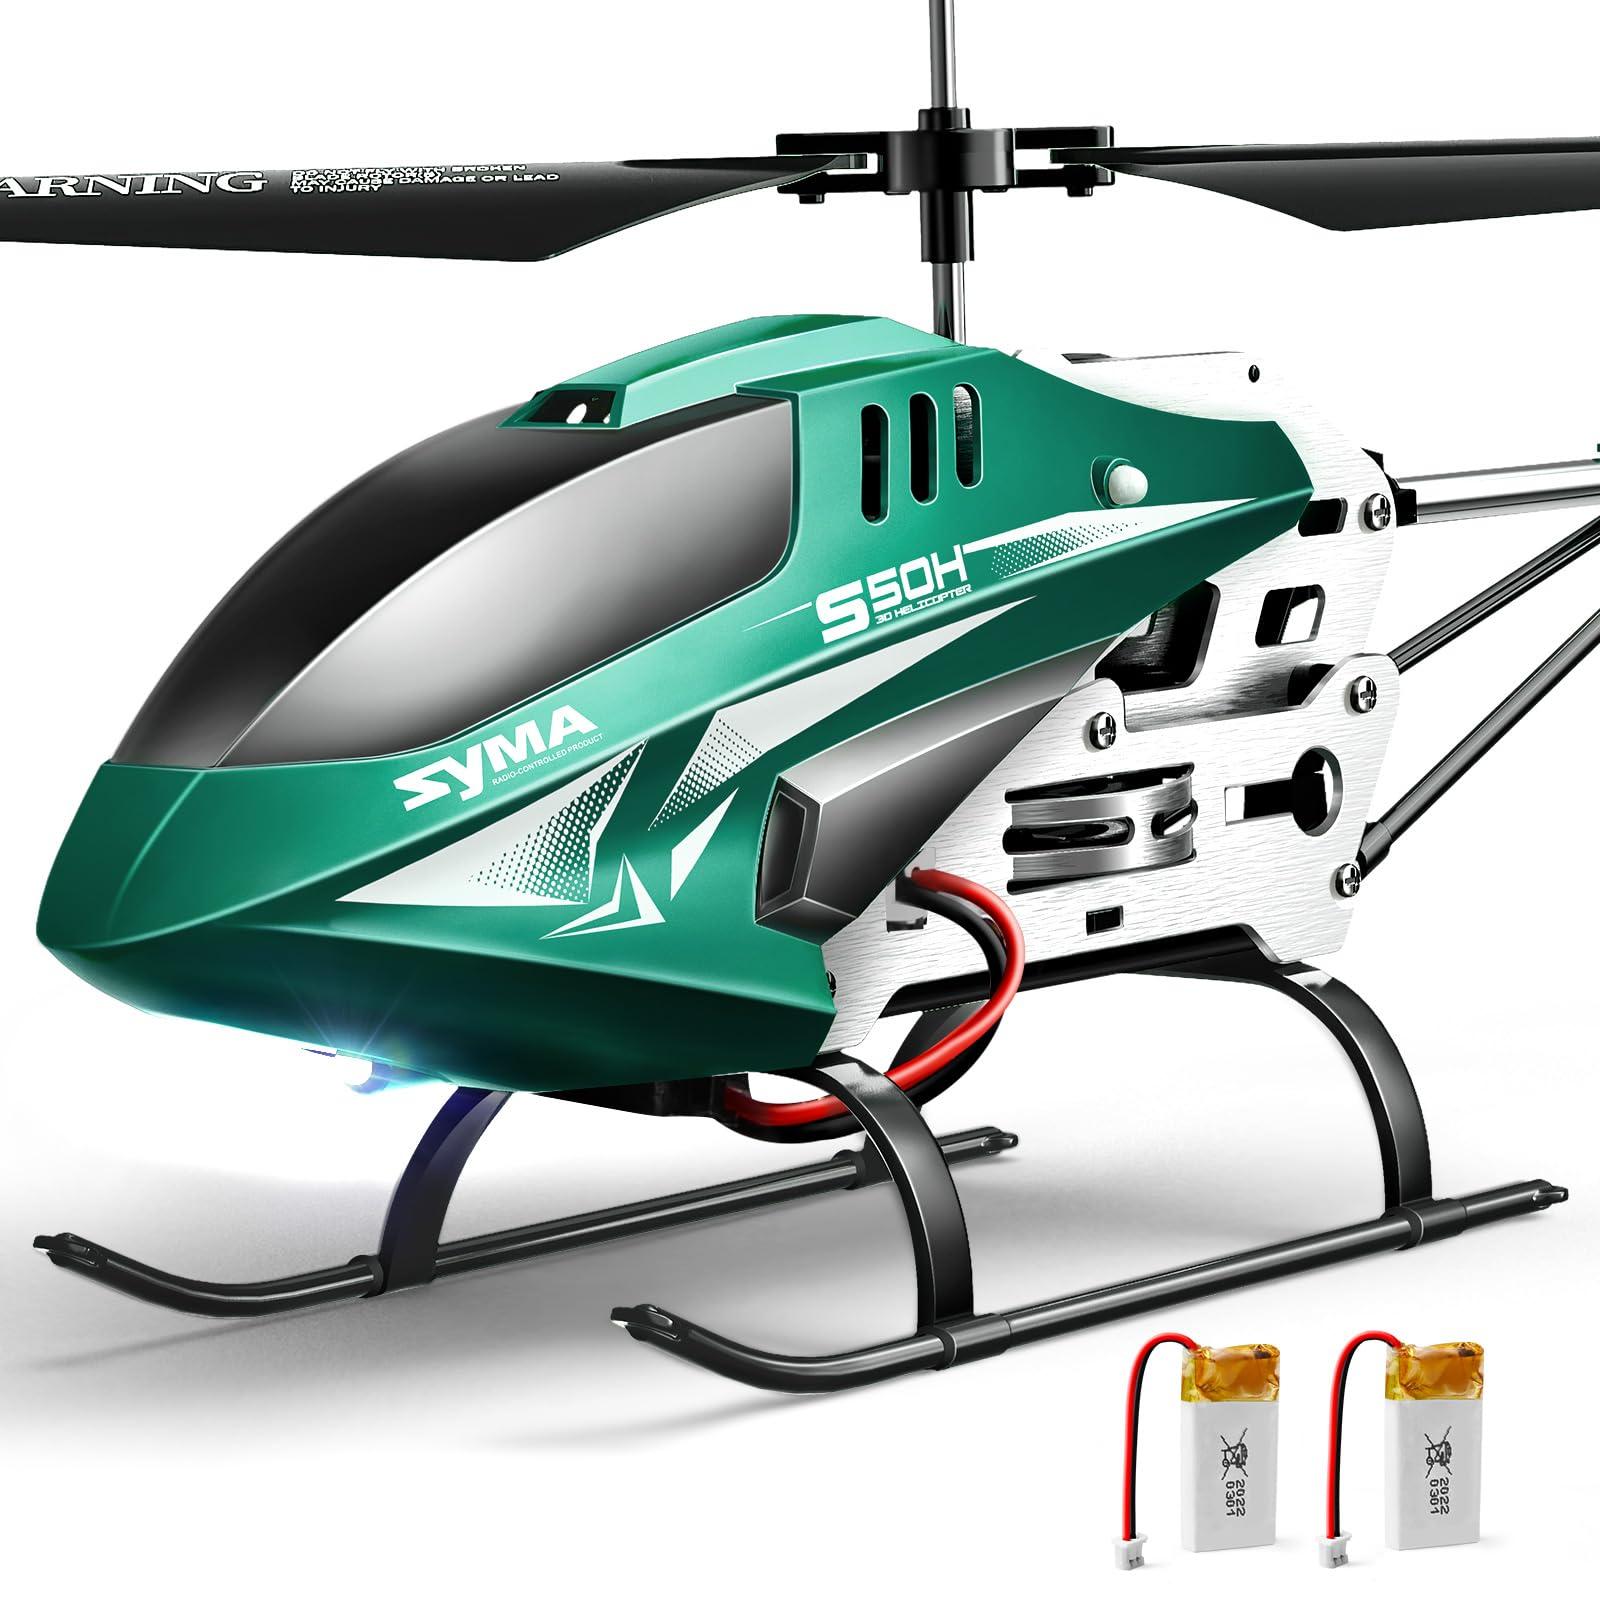 3.5 Ch Helicopter: Top Shopping Websites for 3.5 Ch Helicopters